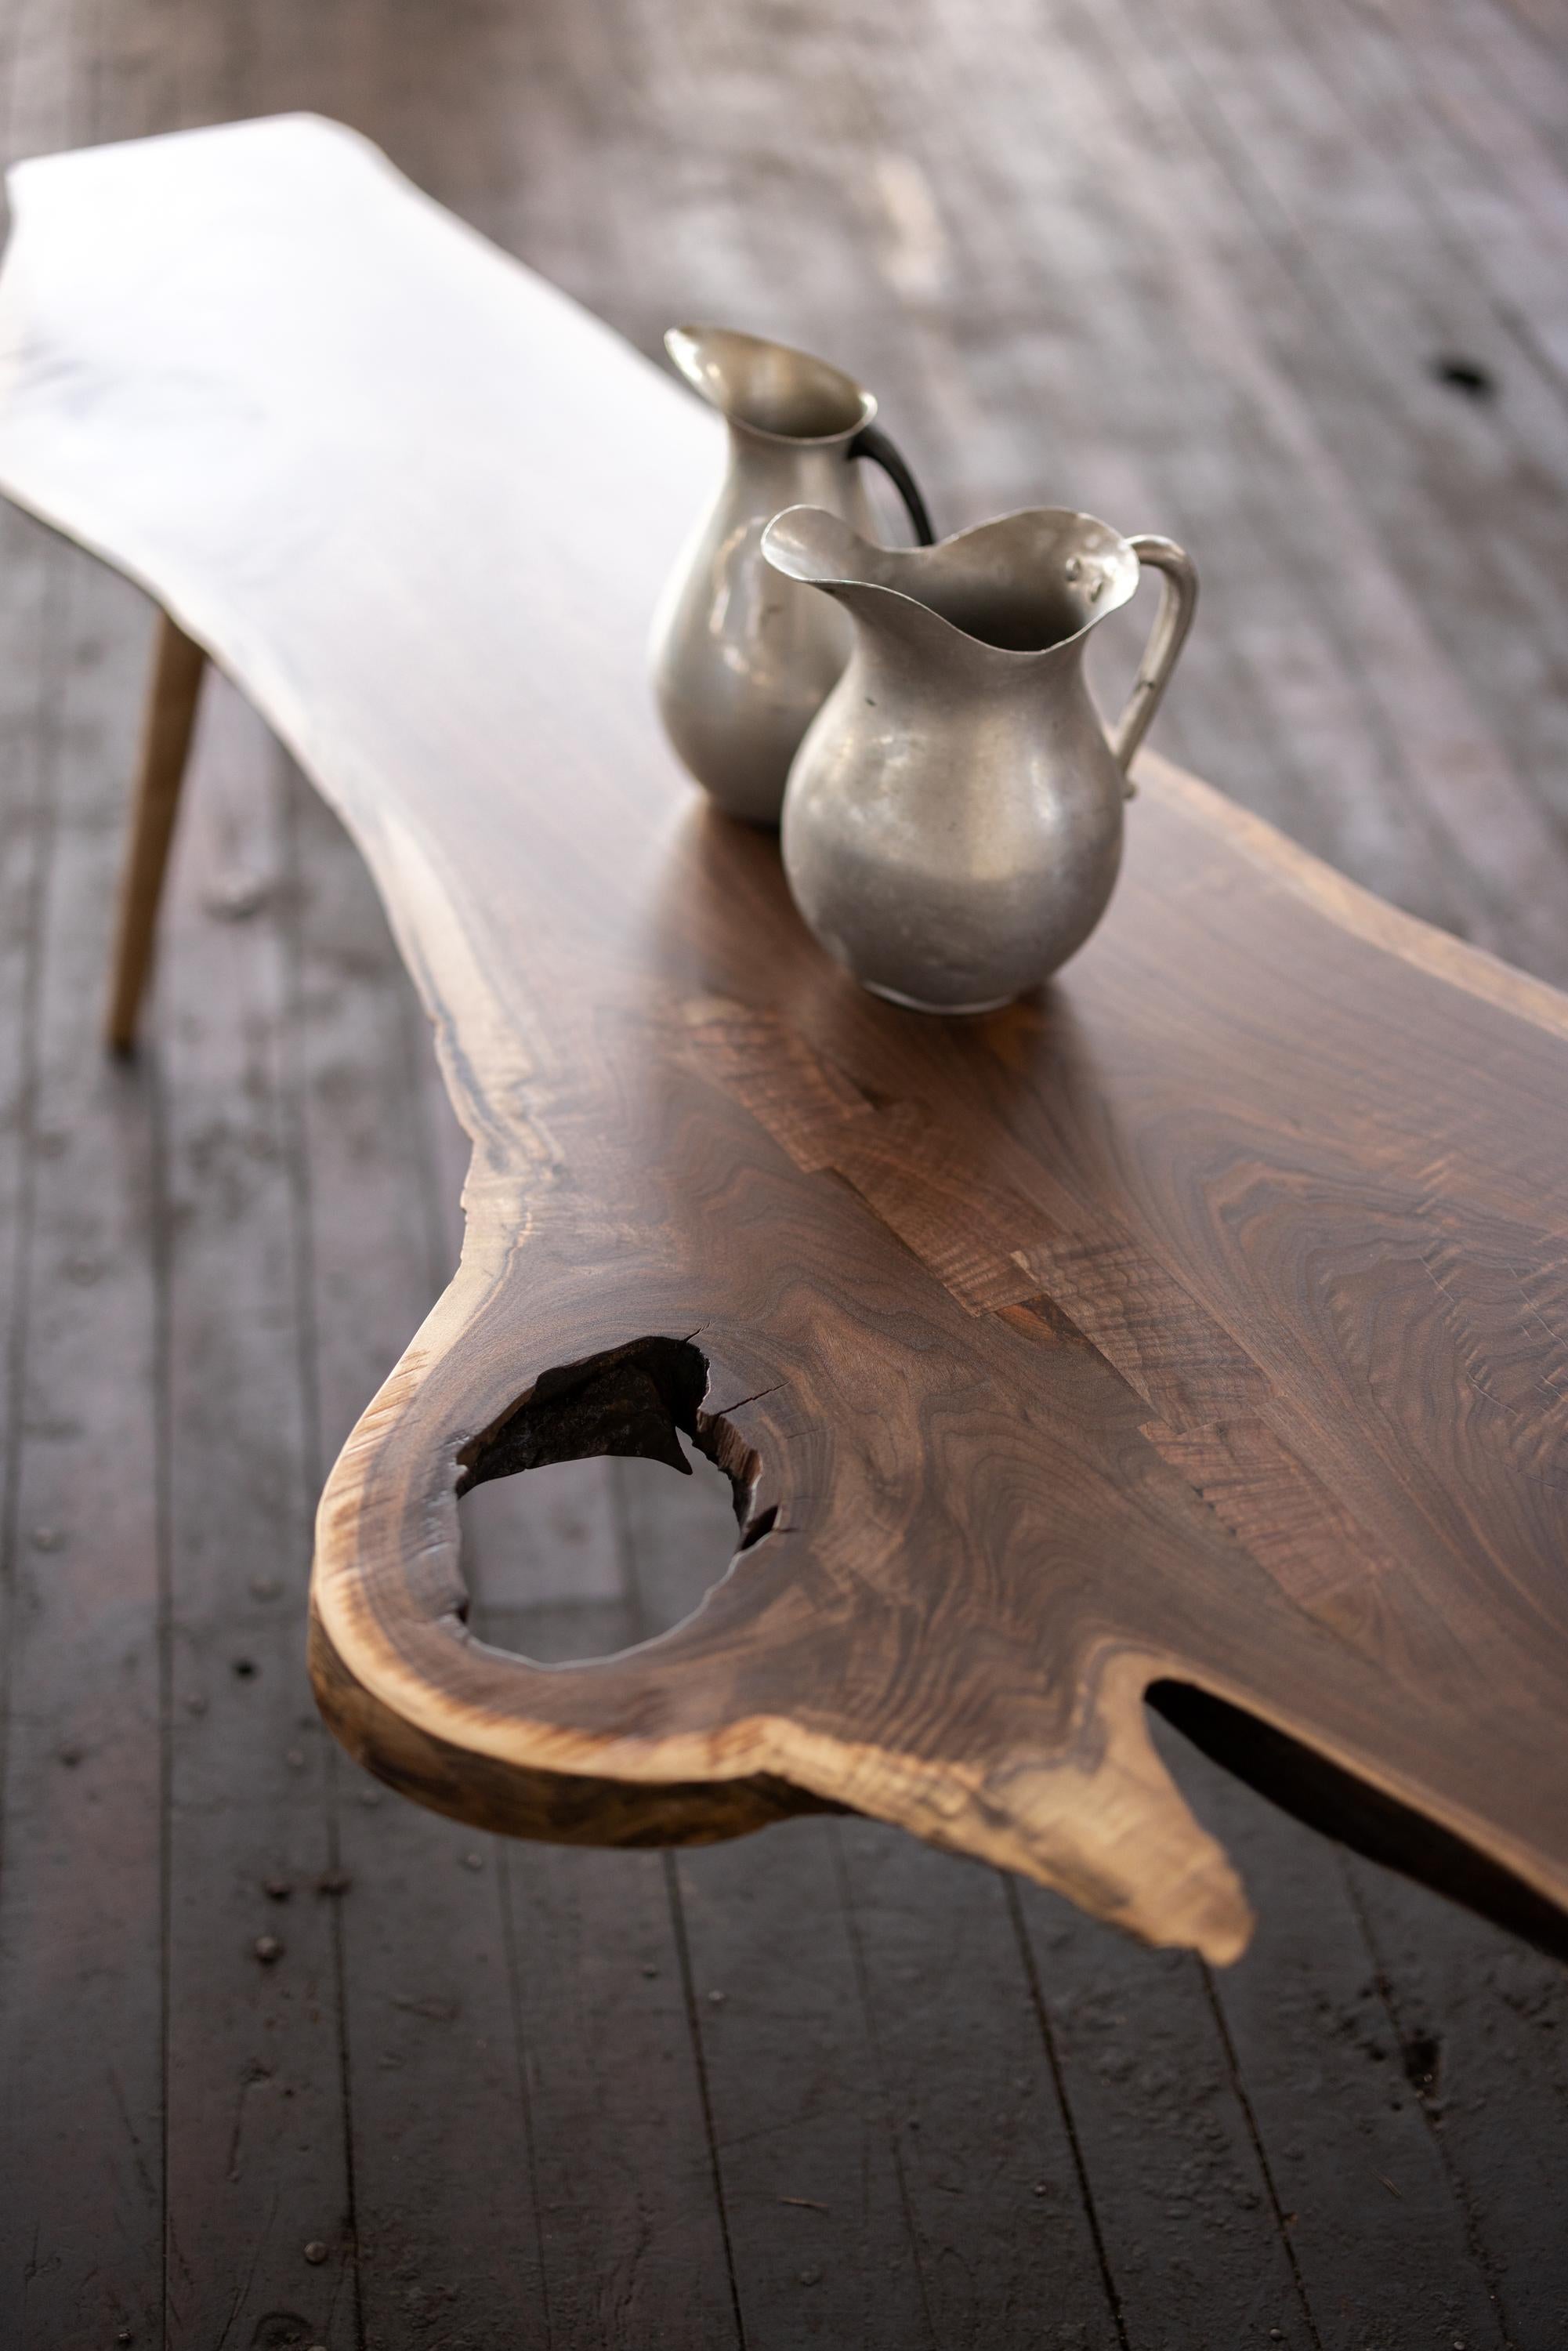 Live Edge walnut slab tables have a unique and natural aesthetic that can make them the centerpiece of a living room. Sleek maple legs are hand turned on the lathe. Named after the Cahaba River, natural irregularities of this natural walnut slab are